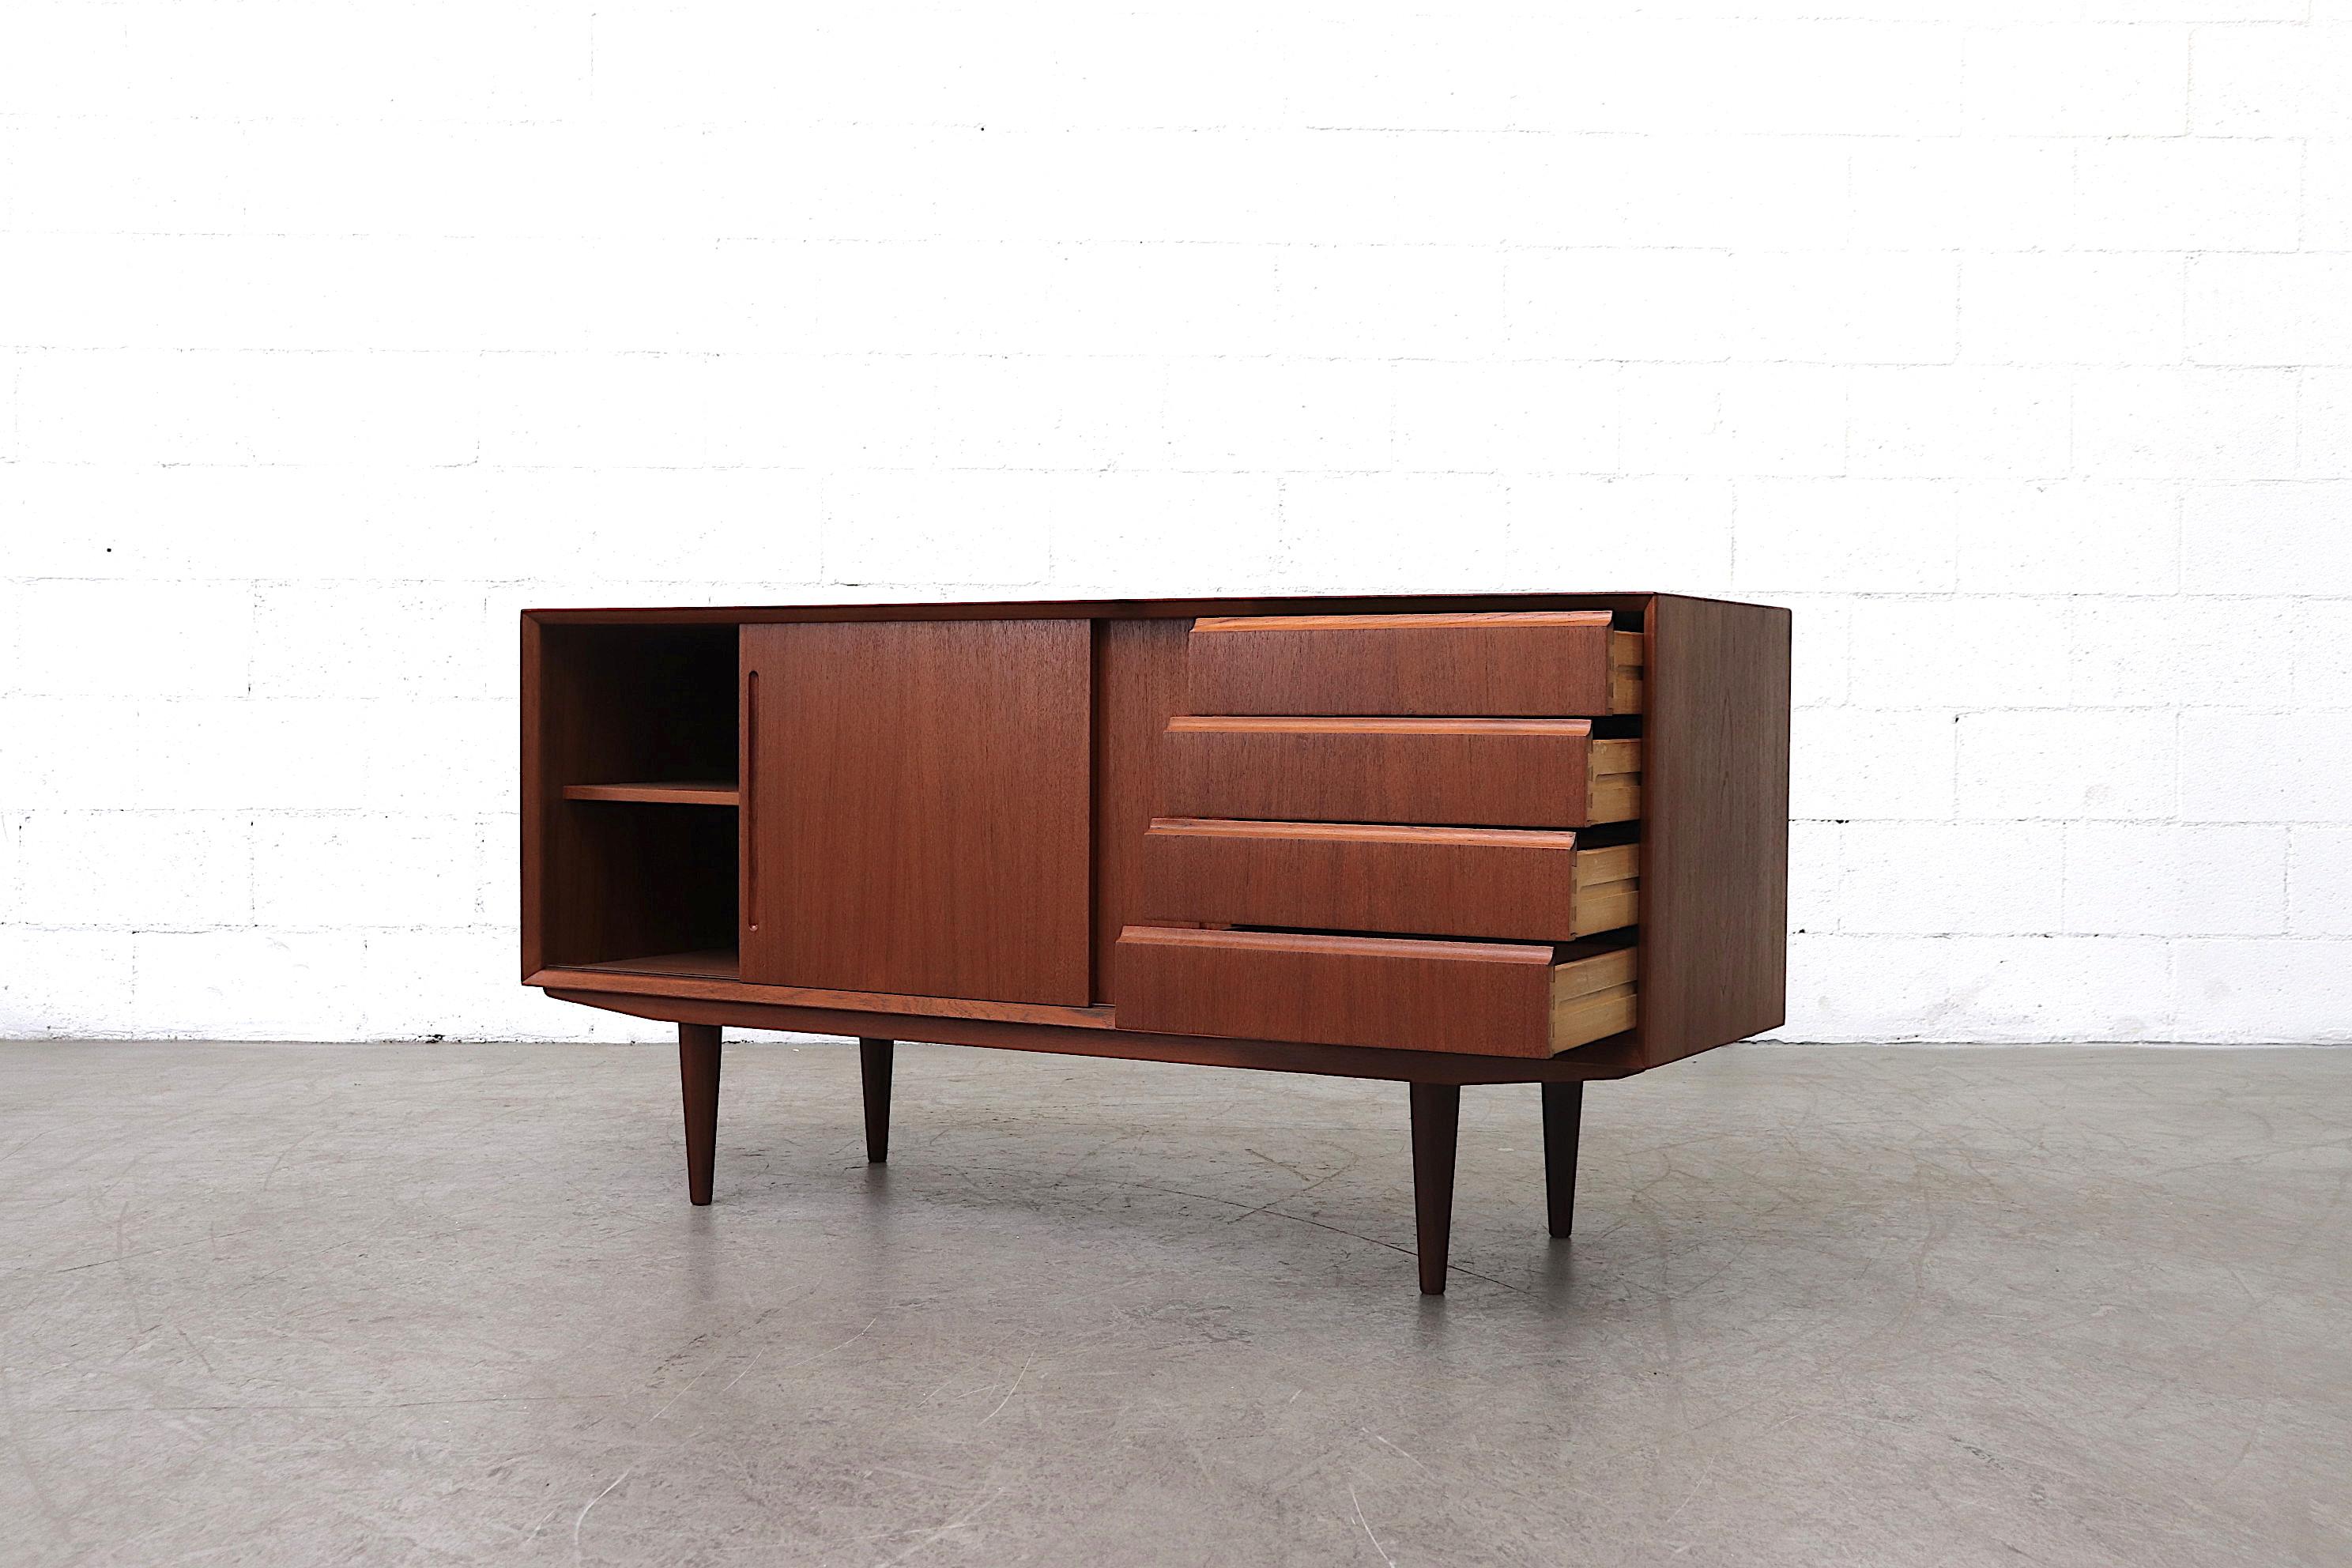 Handsome midcentury teak credenza with side stacked drawers and double sliding doors. Top drawer felt lined with slight staining. In good original condition with wear consistent with its age and use.